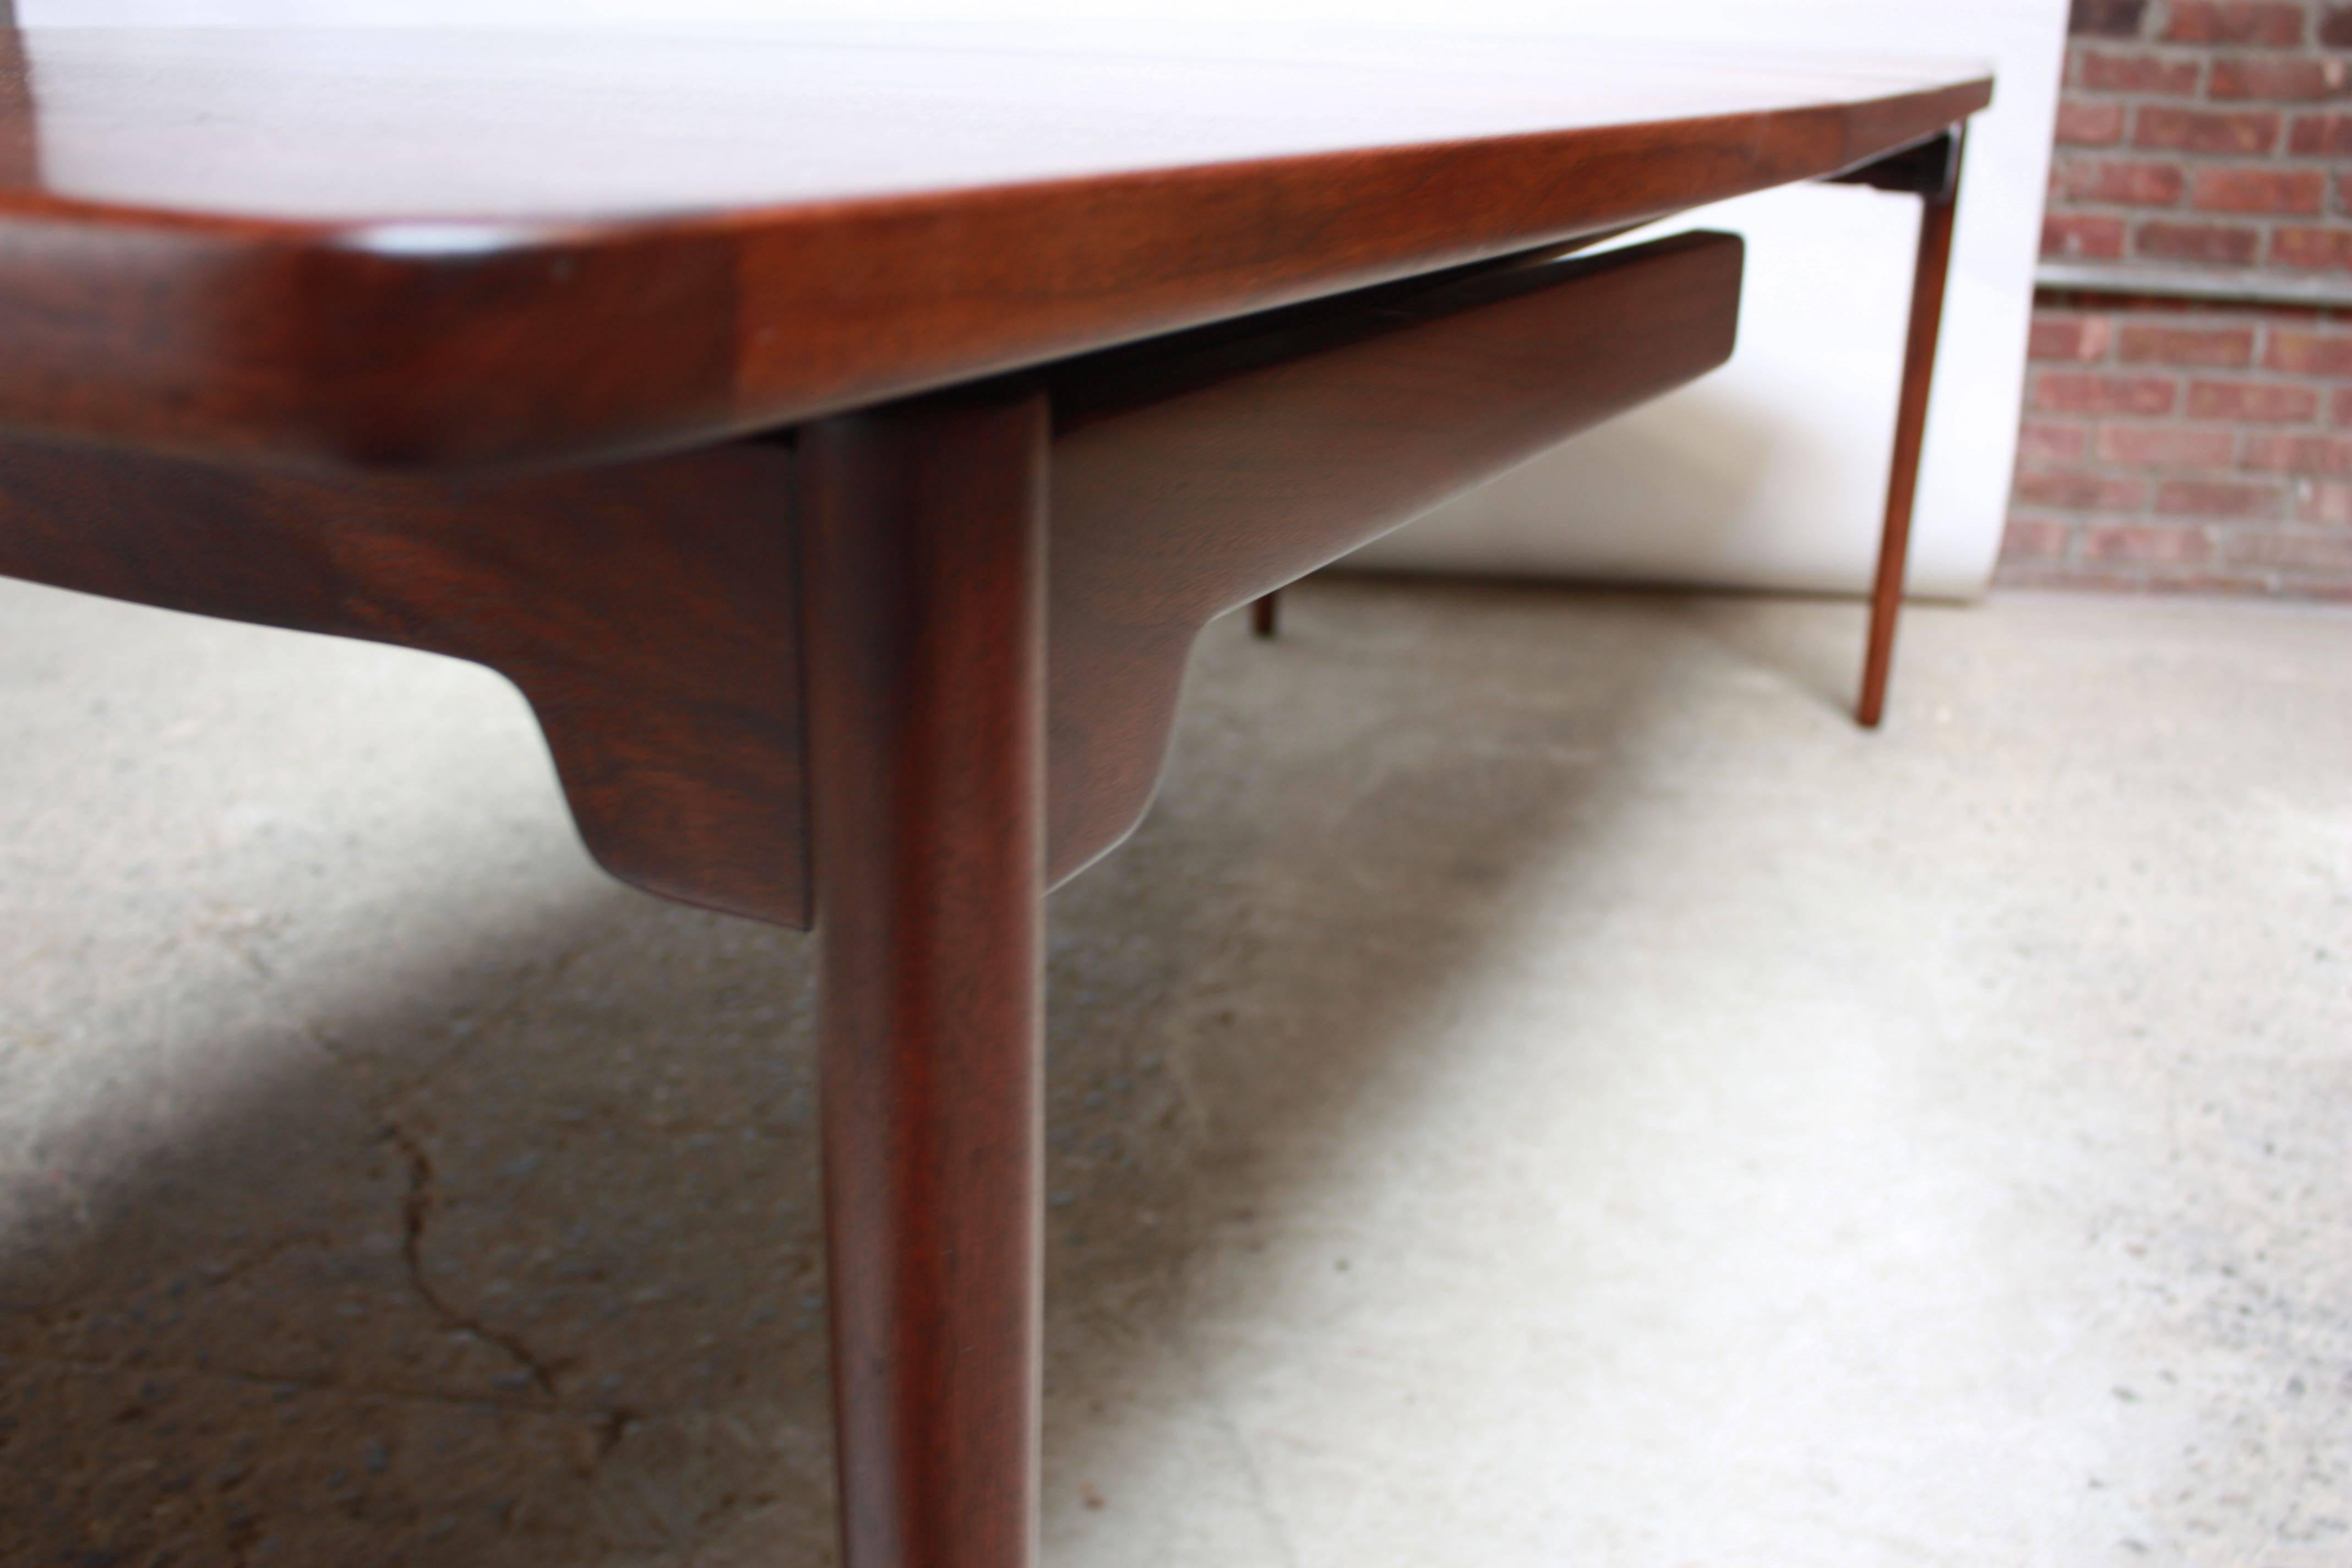 This elegant Jens Risom dining table features a 'floating' walnut surface atop a sculptural base with tapered legs. Designed in the 1950s, this piece was among his earliest designs exhibiting both form and function. The table includes the two